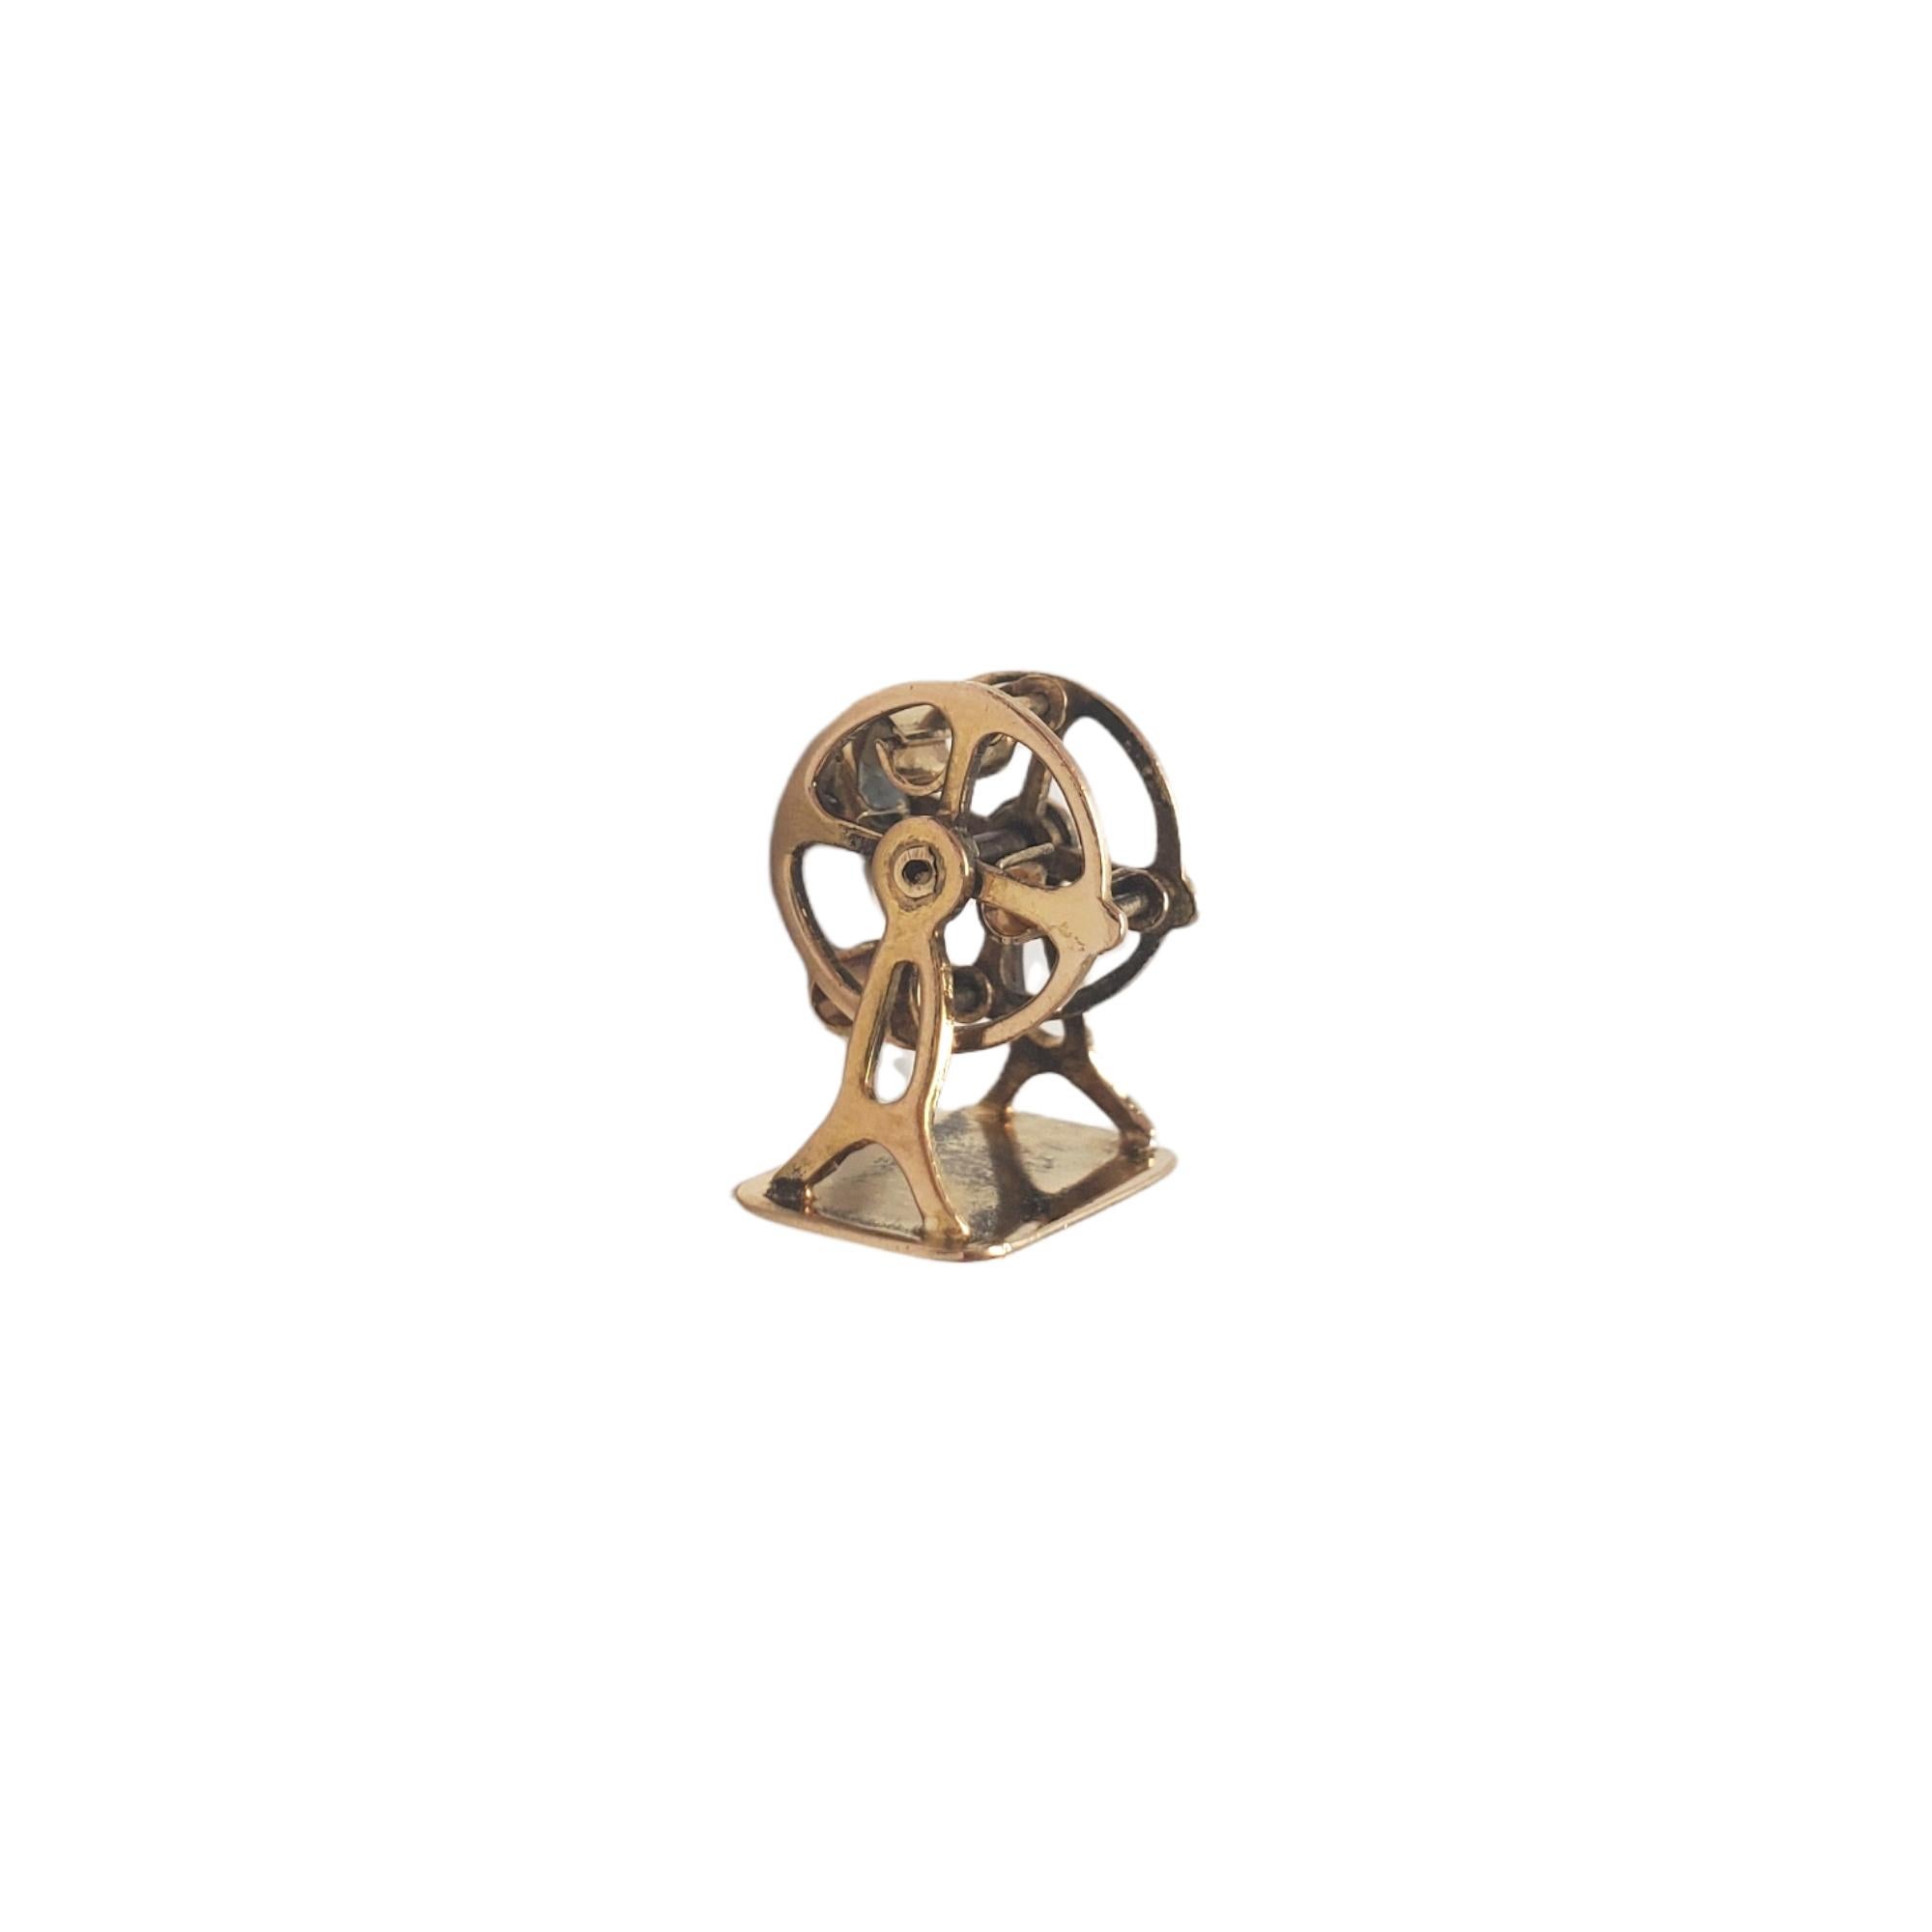 14K Yellow Gold Ferris Wheel Charm

This lovely charm features an articulating ferris wheel with hanging seats in 14K yellow gold.

Size: 12.55 mm X 8.81 mm

Weight: 1.4 gr/ 0.9 dwt

Hallmark: 14K

Very good condition, professionally polished.

Will